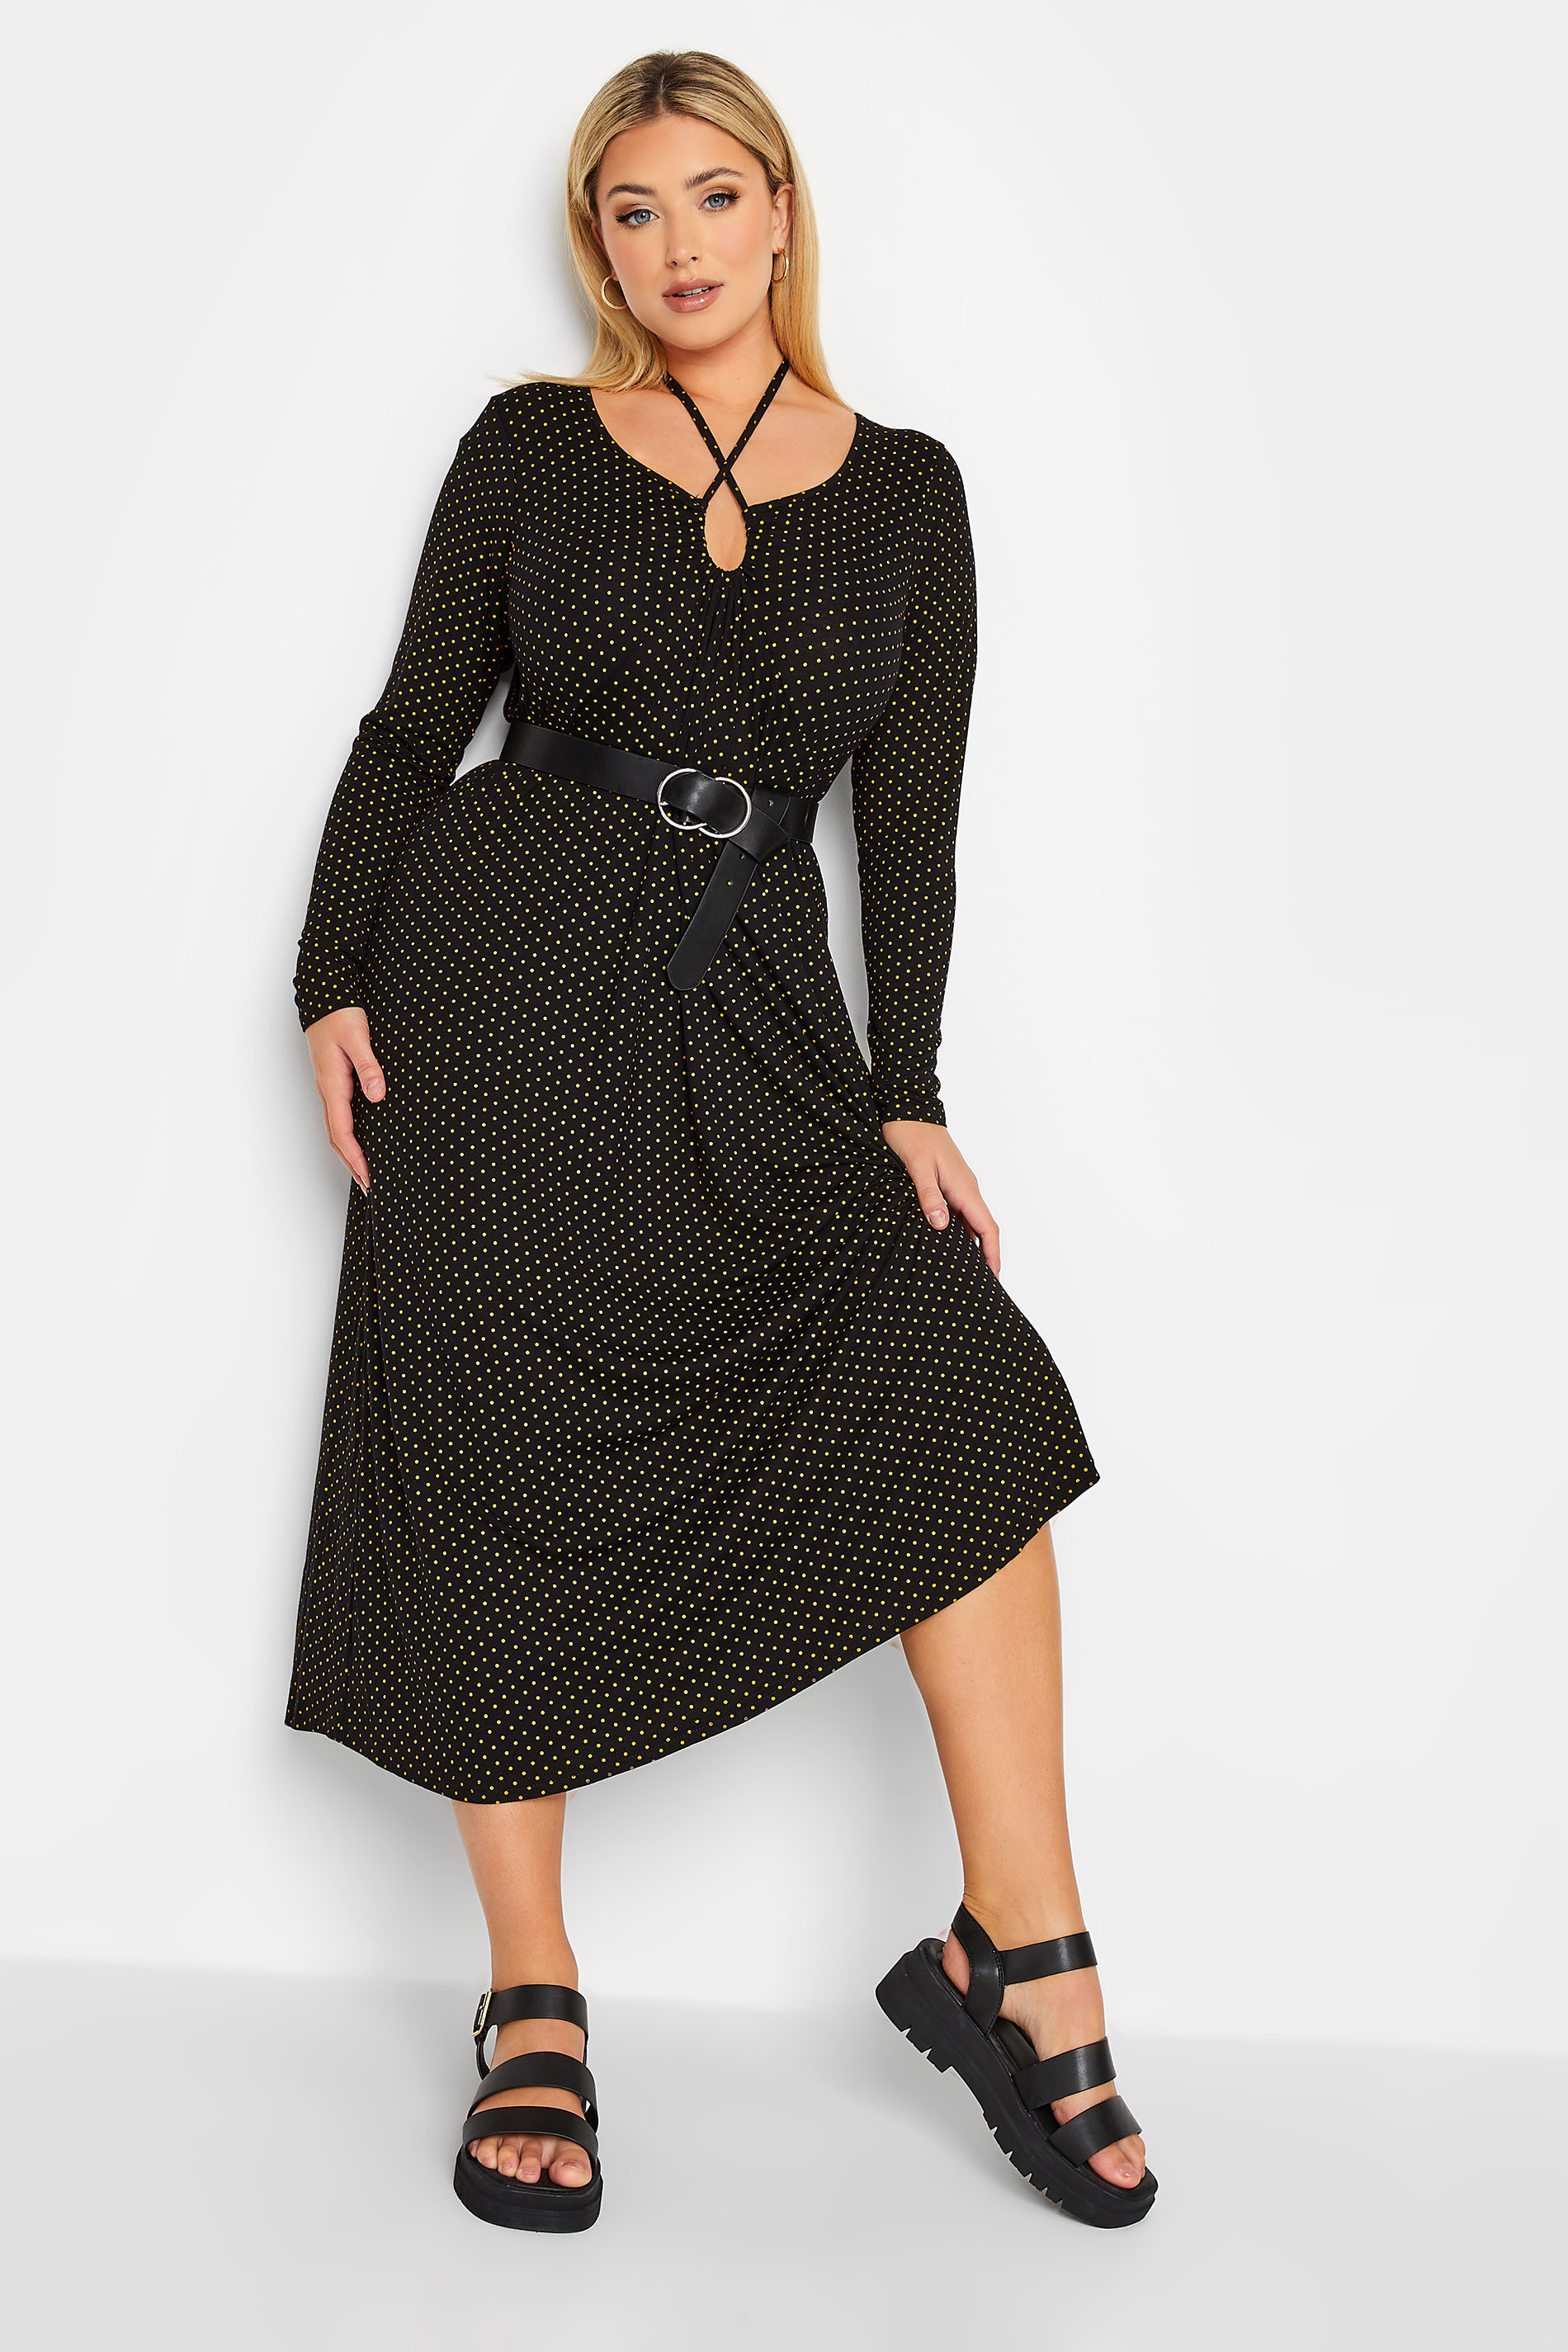 LIMITED COLLECTION Plus Size Black Polka Dot Keyhole Tie Neck Midaxi Dress | Yours Clothing 2